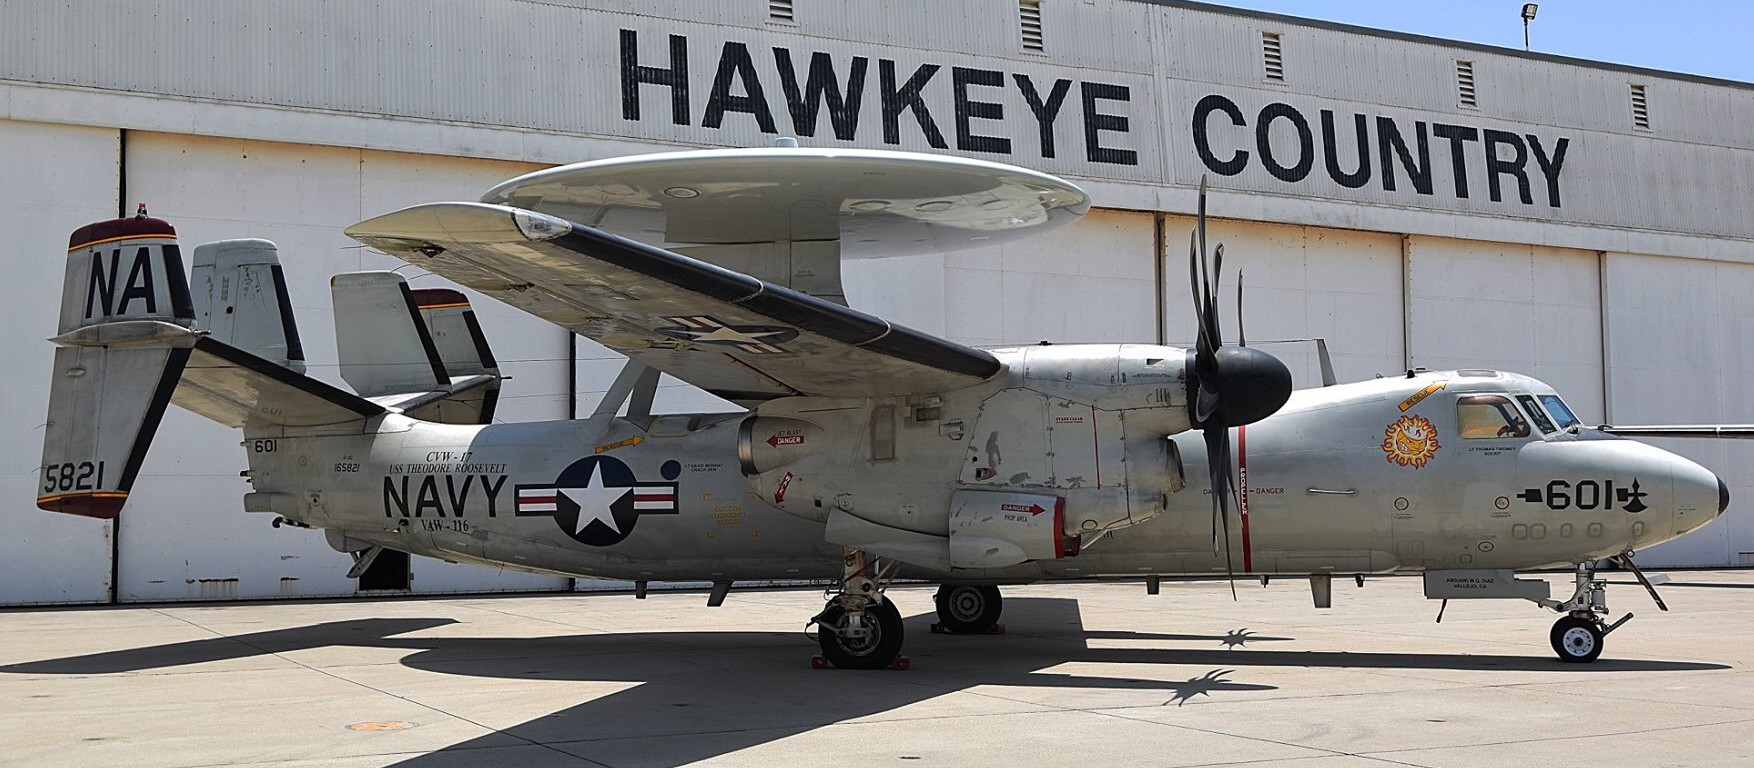 vaw-116 sun kings airborne command control squadron carrier early warning cvw-17 naval base ventura county point mugu 77